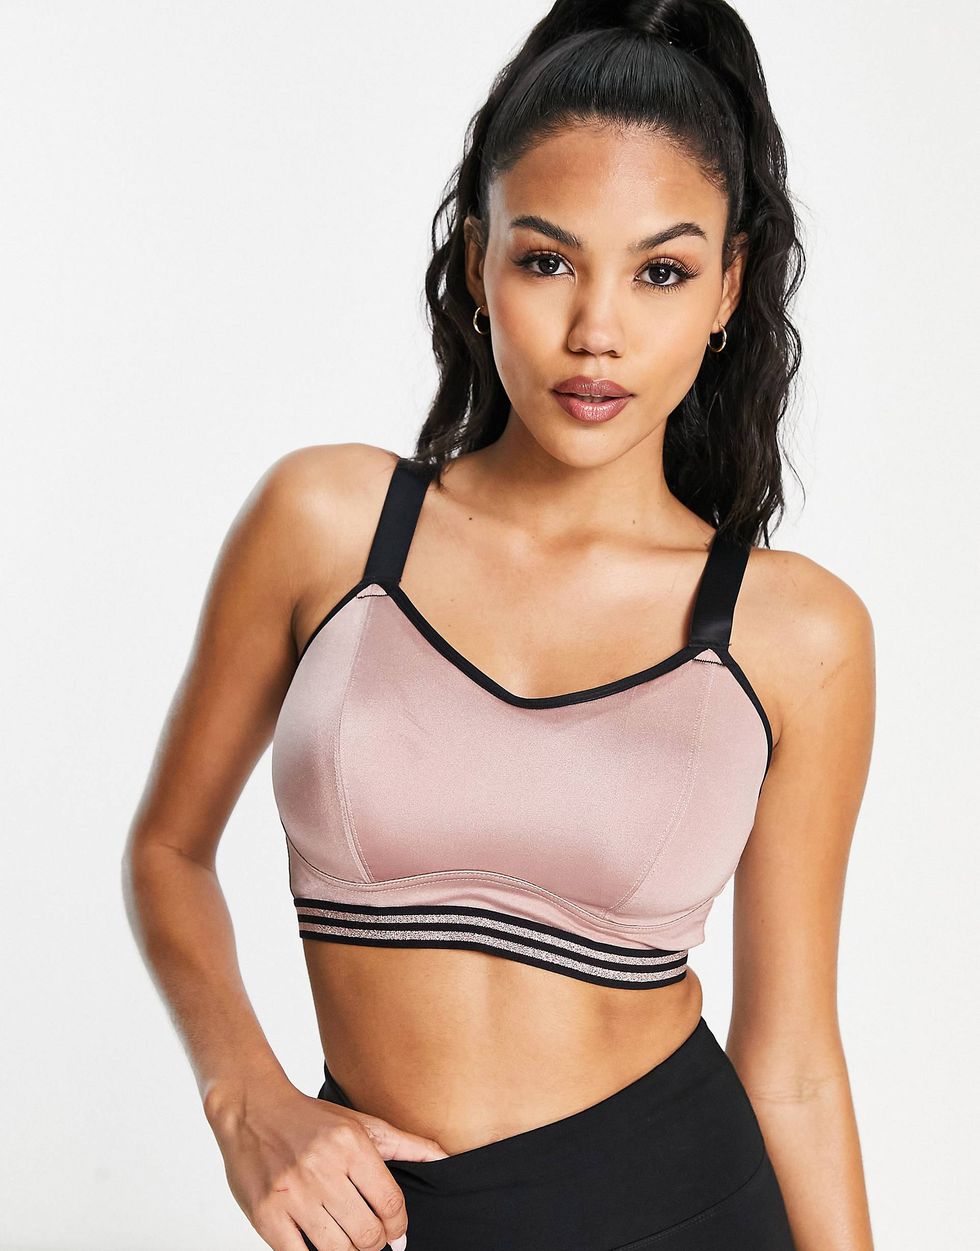 All Big-Boobed Girls Need to Know About This Sports Bra - Racked